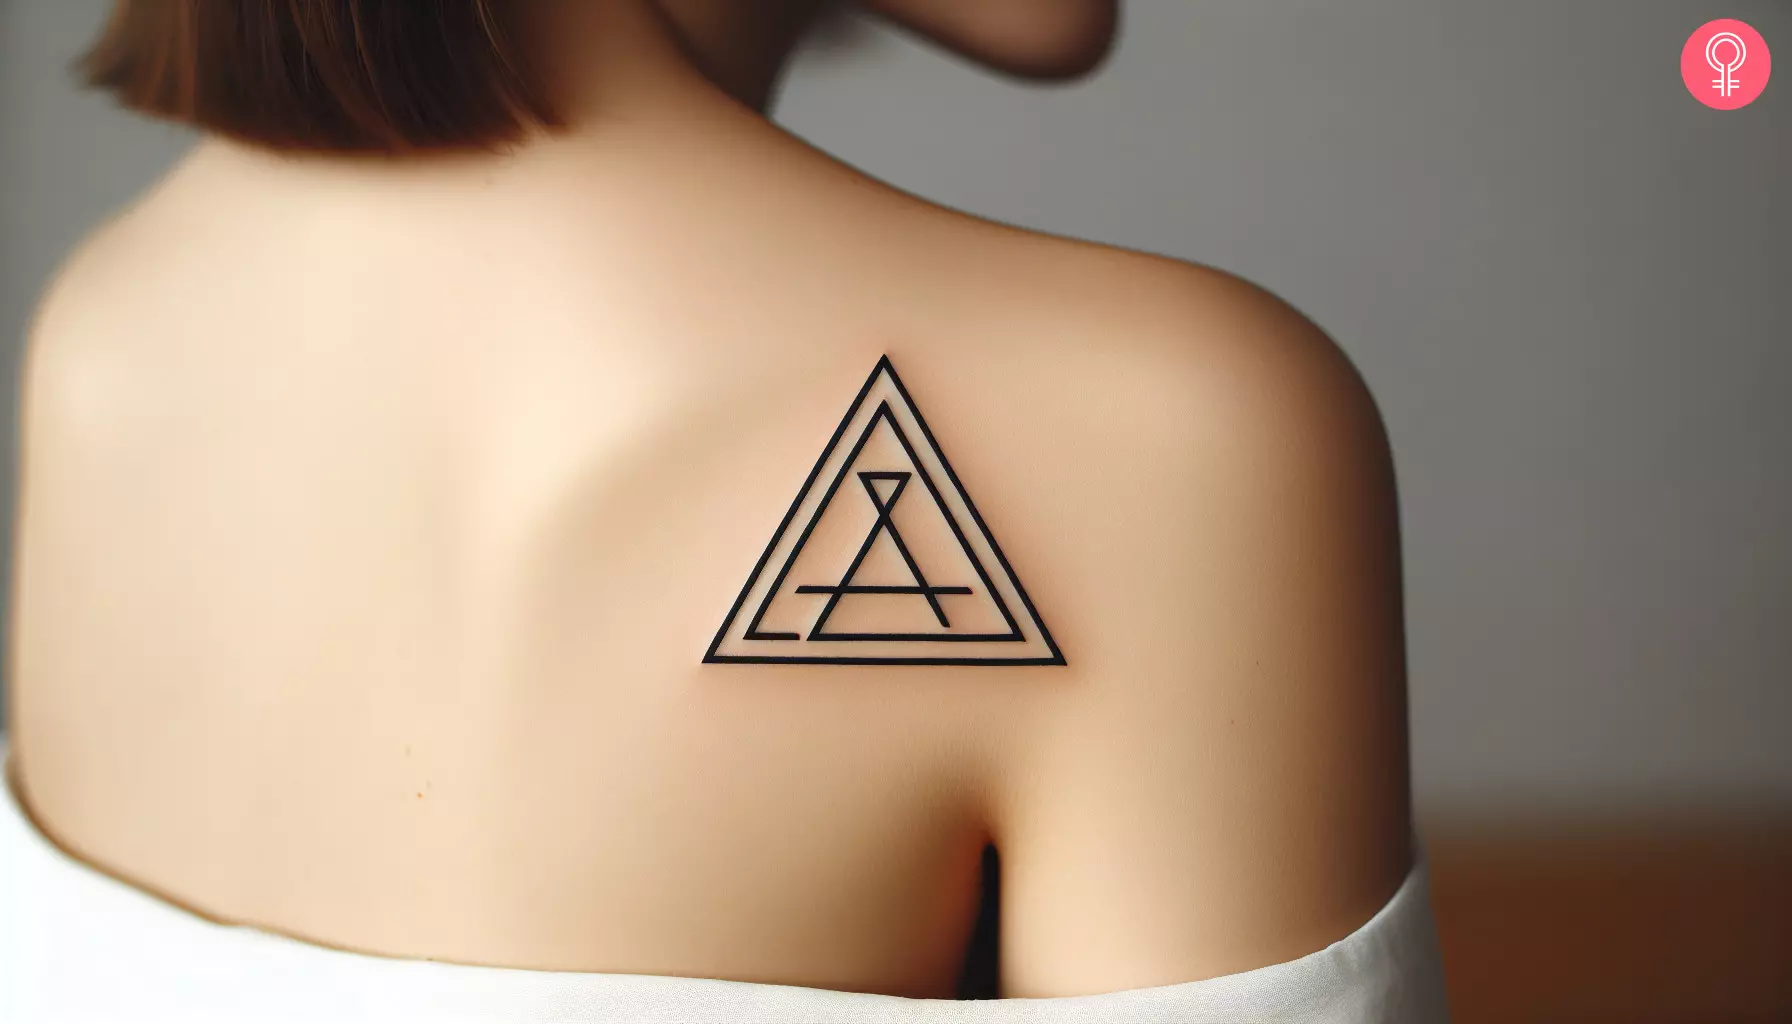 A woman with a triangle pattern tattoo on her upper back